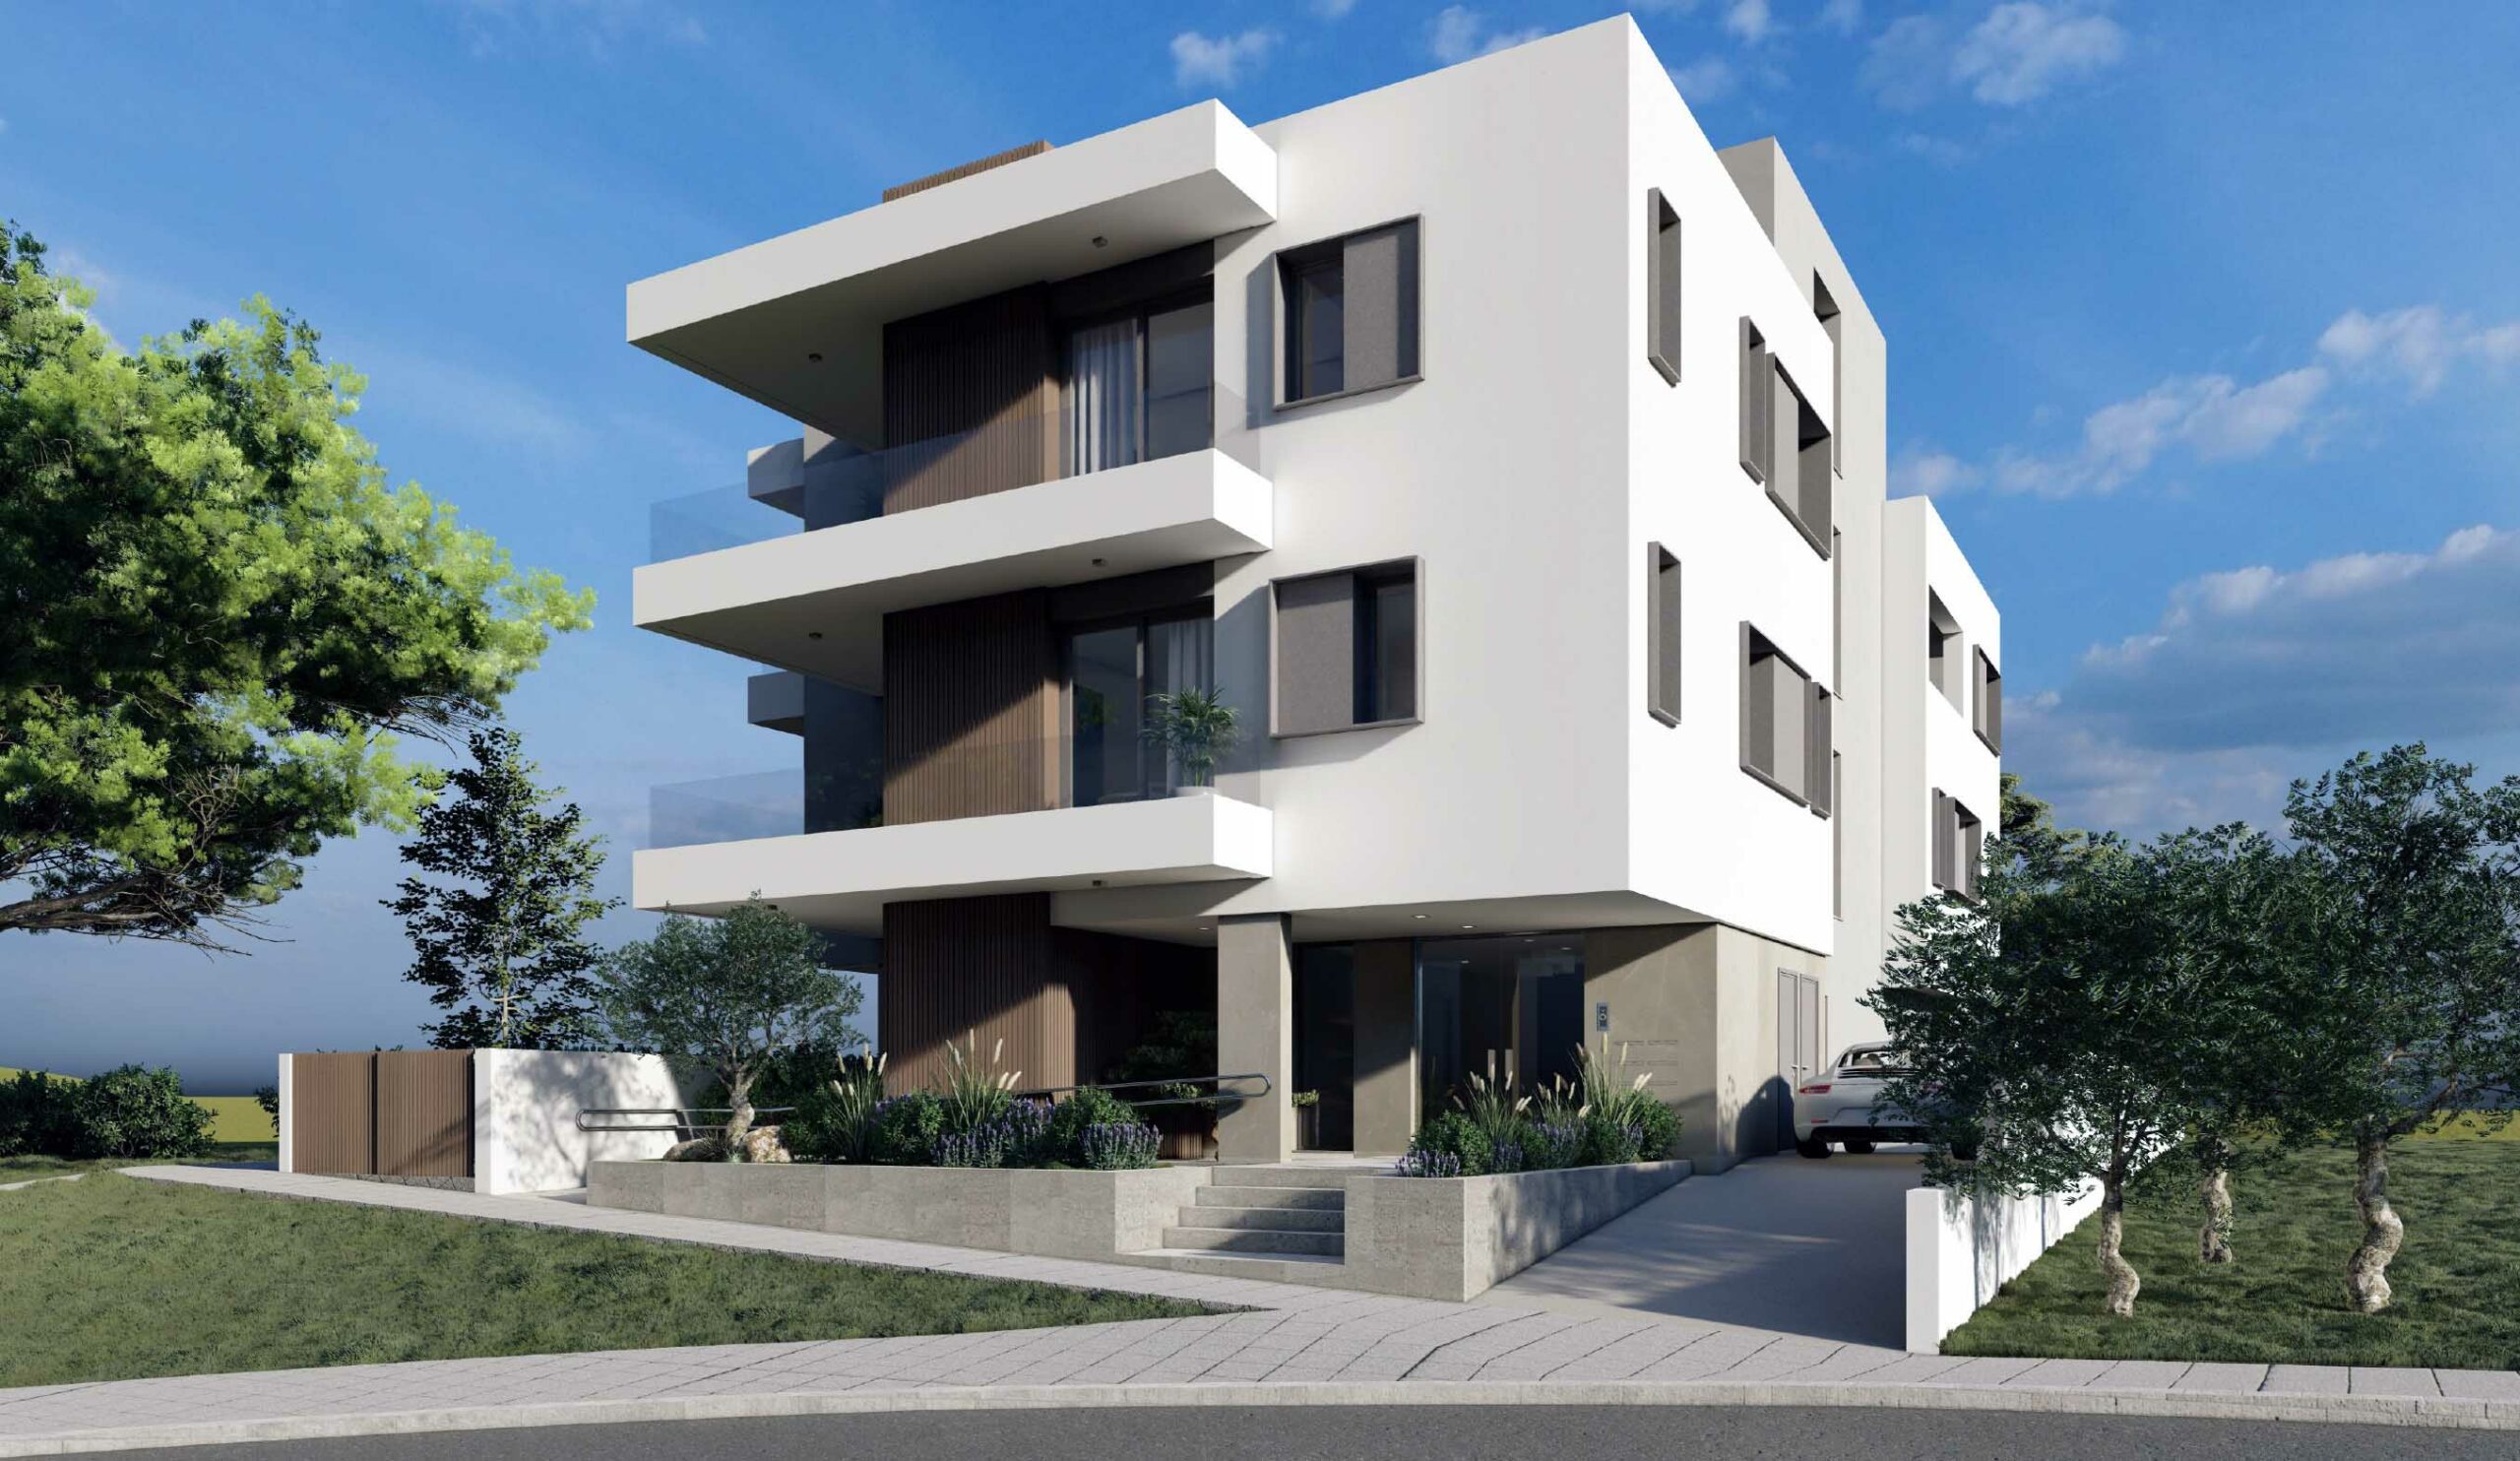 1 Bedroom Apartment for Sale in Anthoupolis / Archangelos, Nicosia District